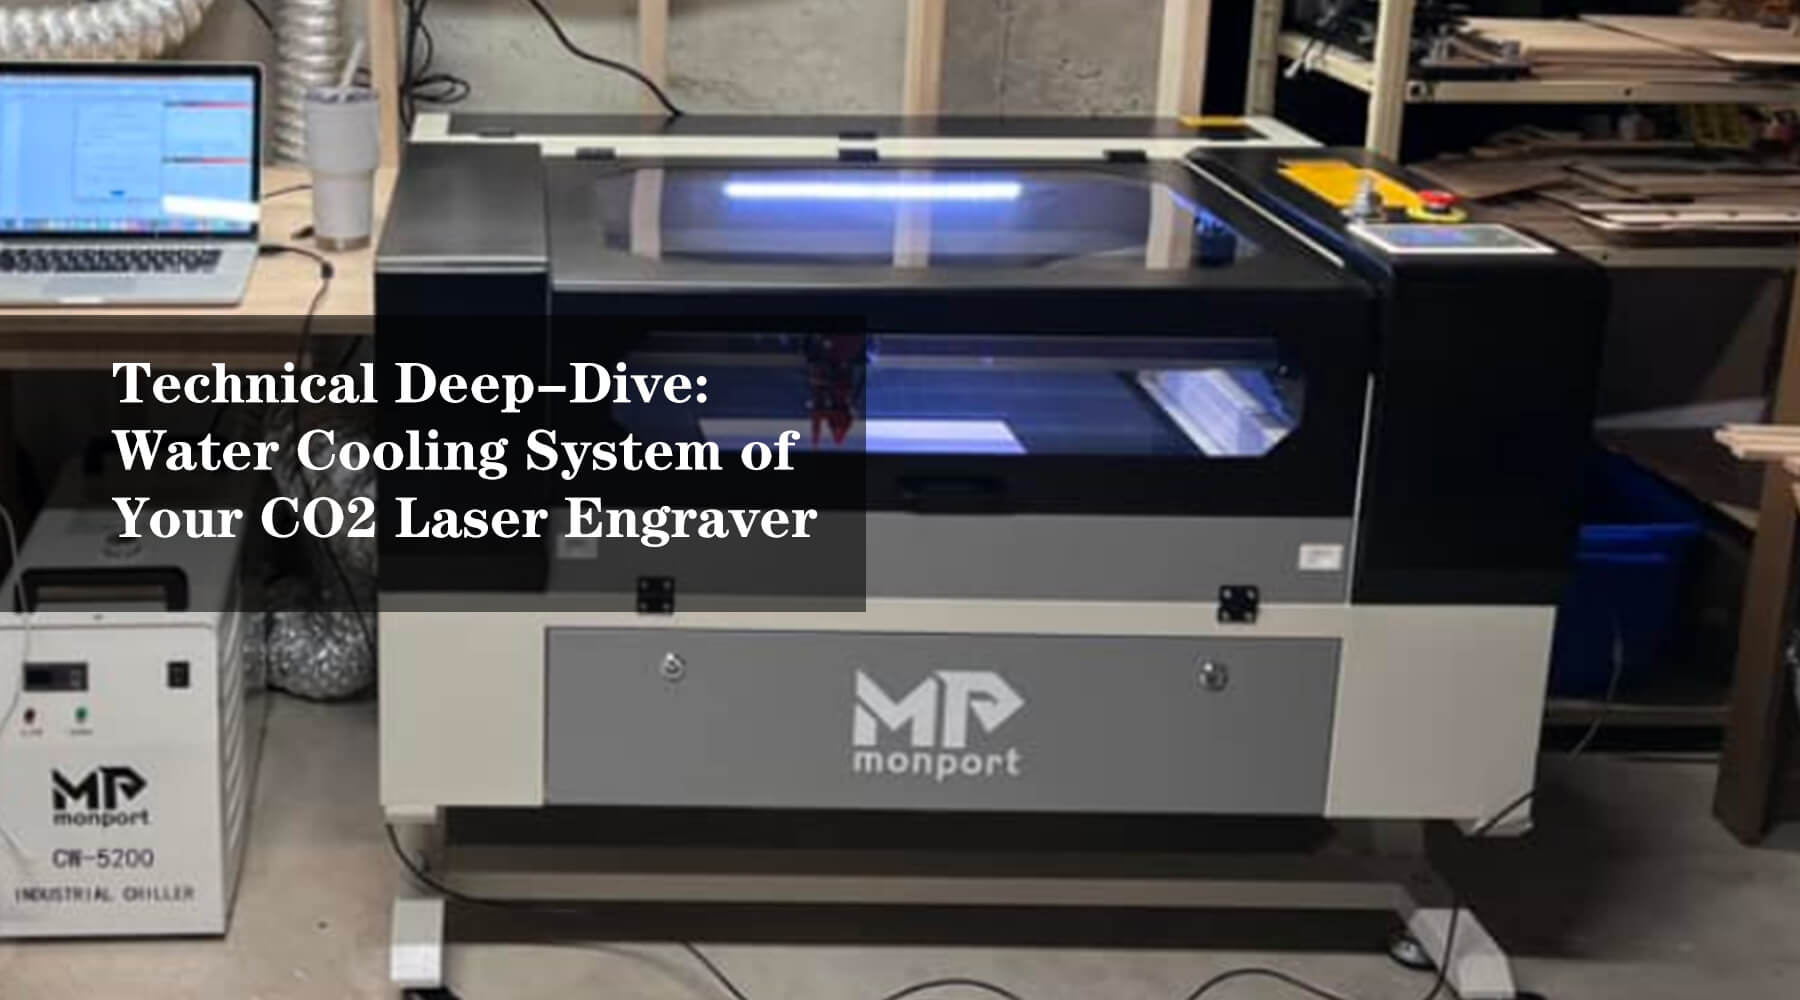 Technical Deep-Dive: Water Cooling System of Your CO2 Laser Engraver